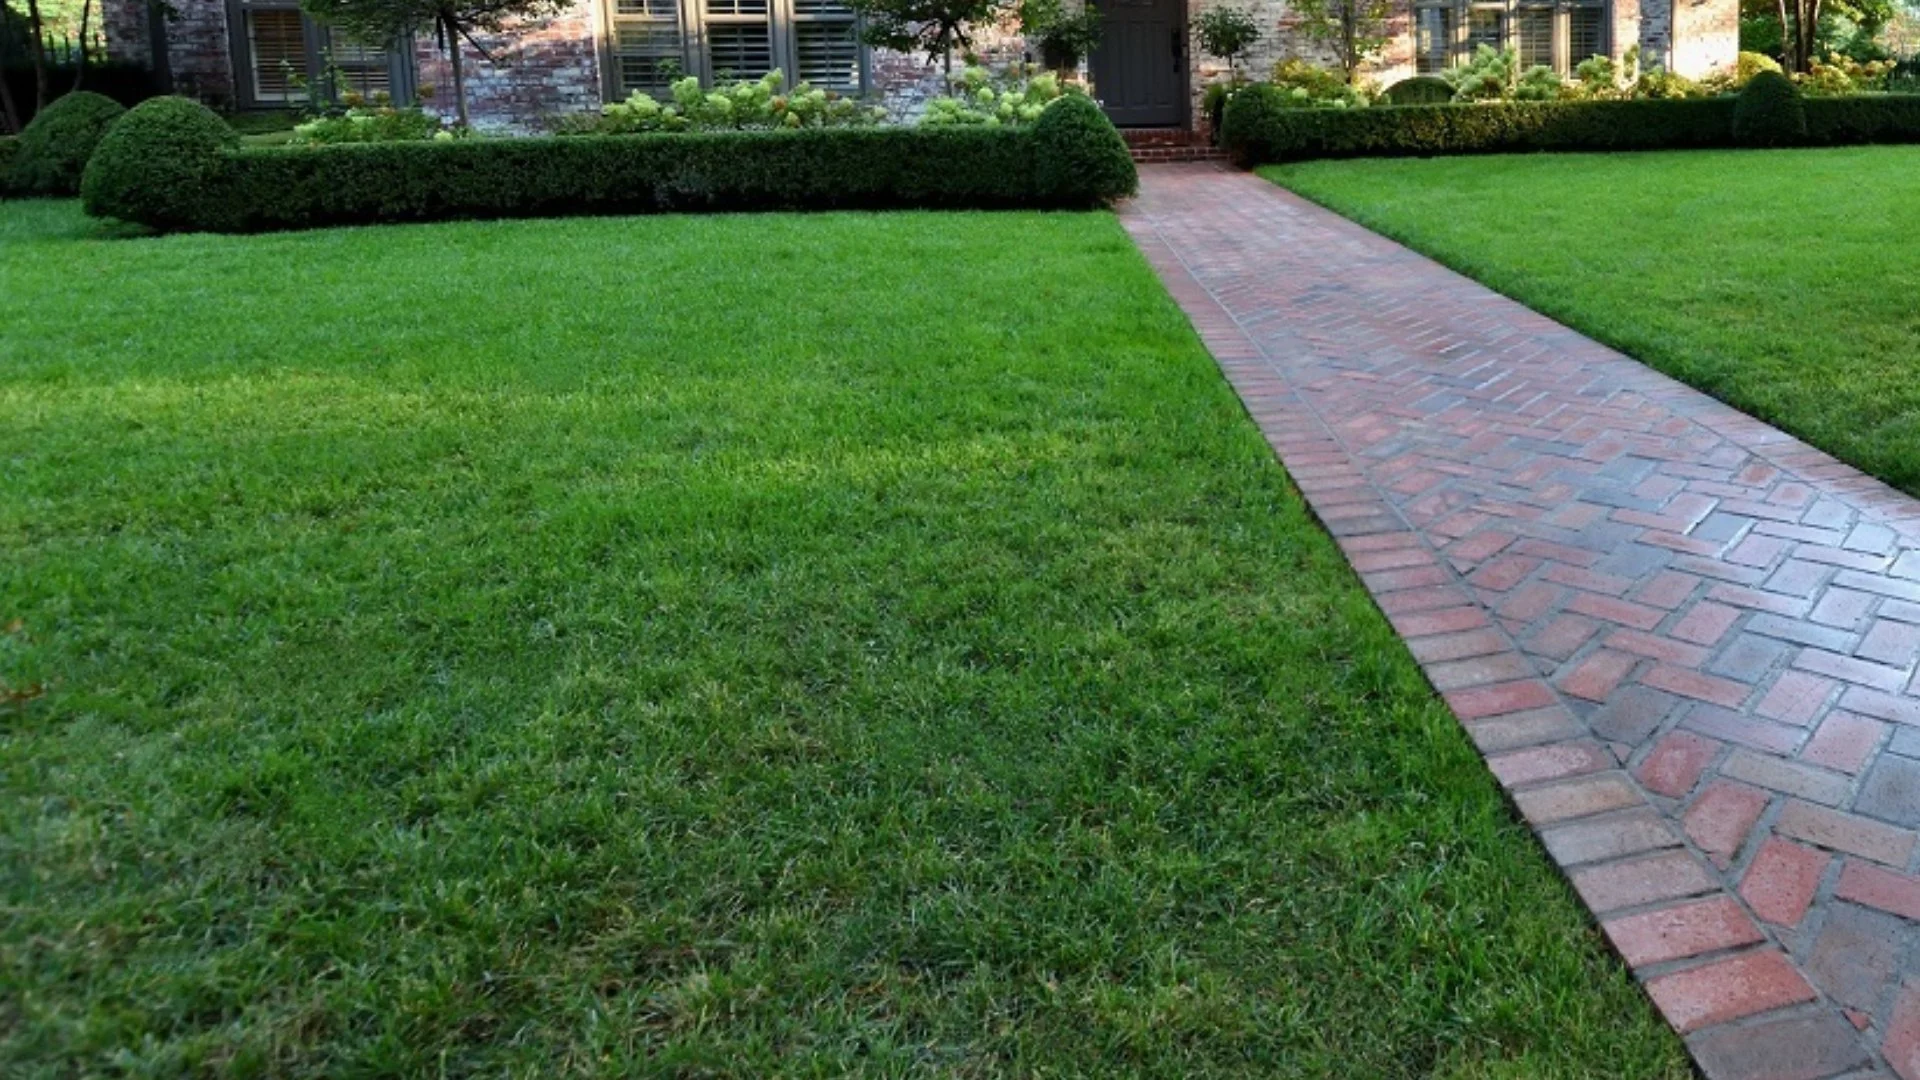 Spring Lawn Fertilization: How Many Times Should You Treat Your Grass?